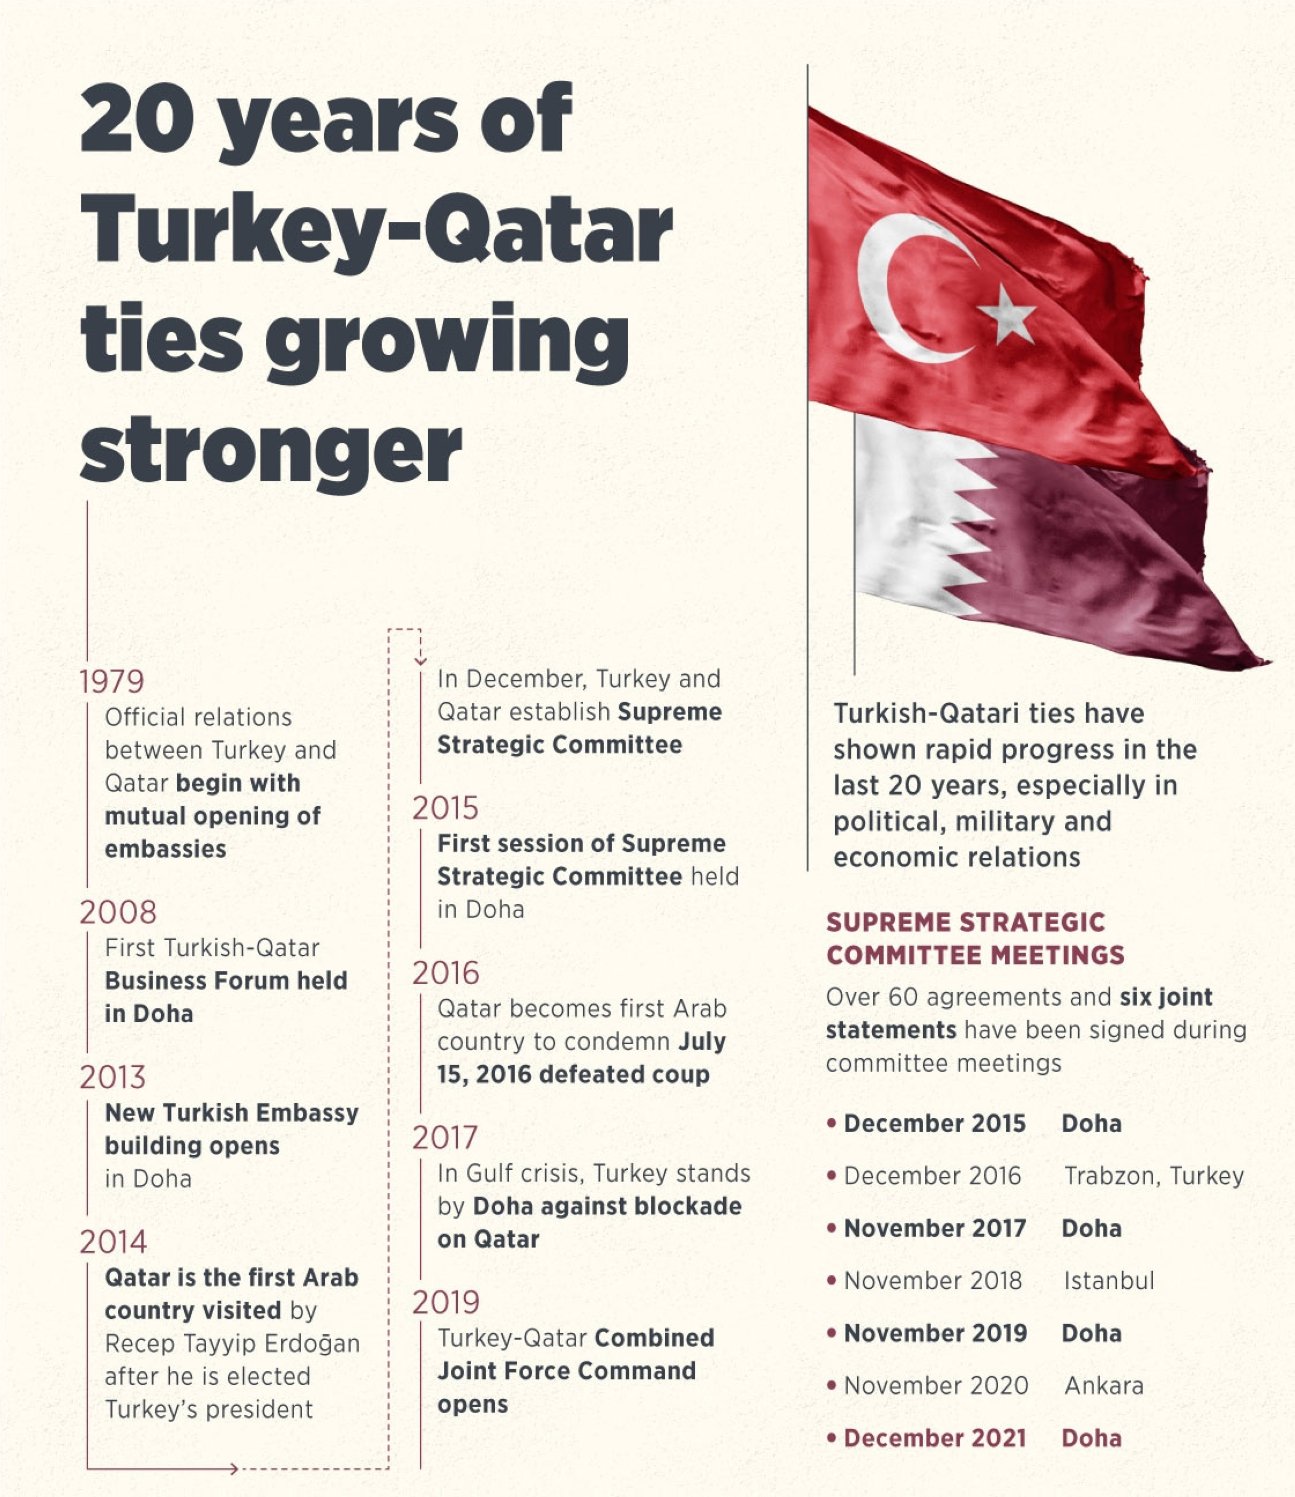  An infographic by Anadolu Agency detailing two decades of Turkish-Qatari relations.
